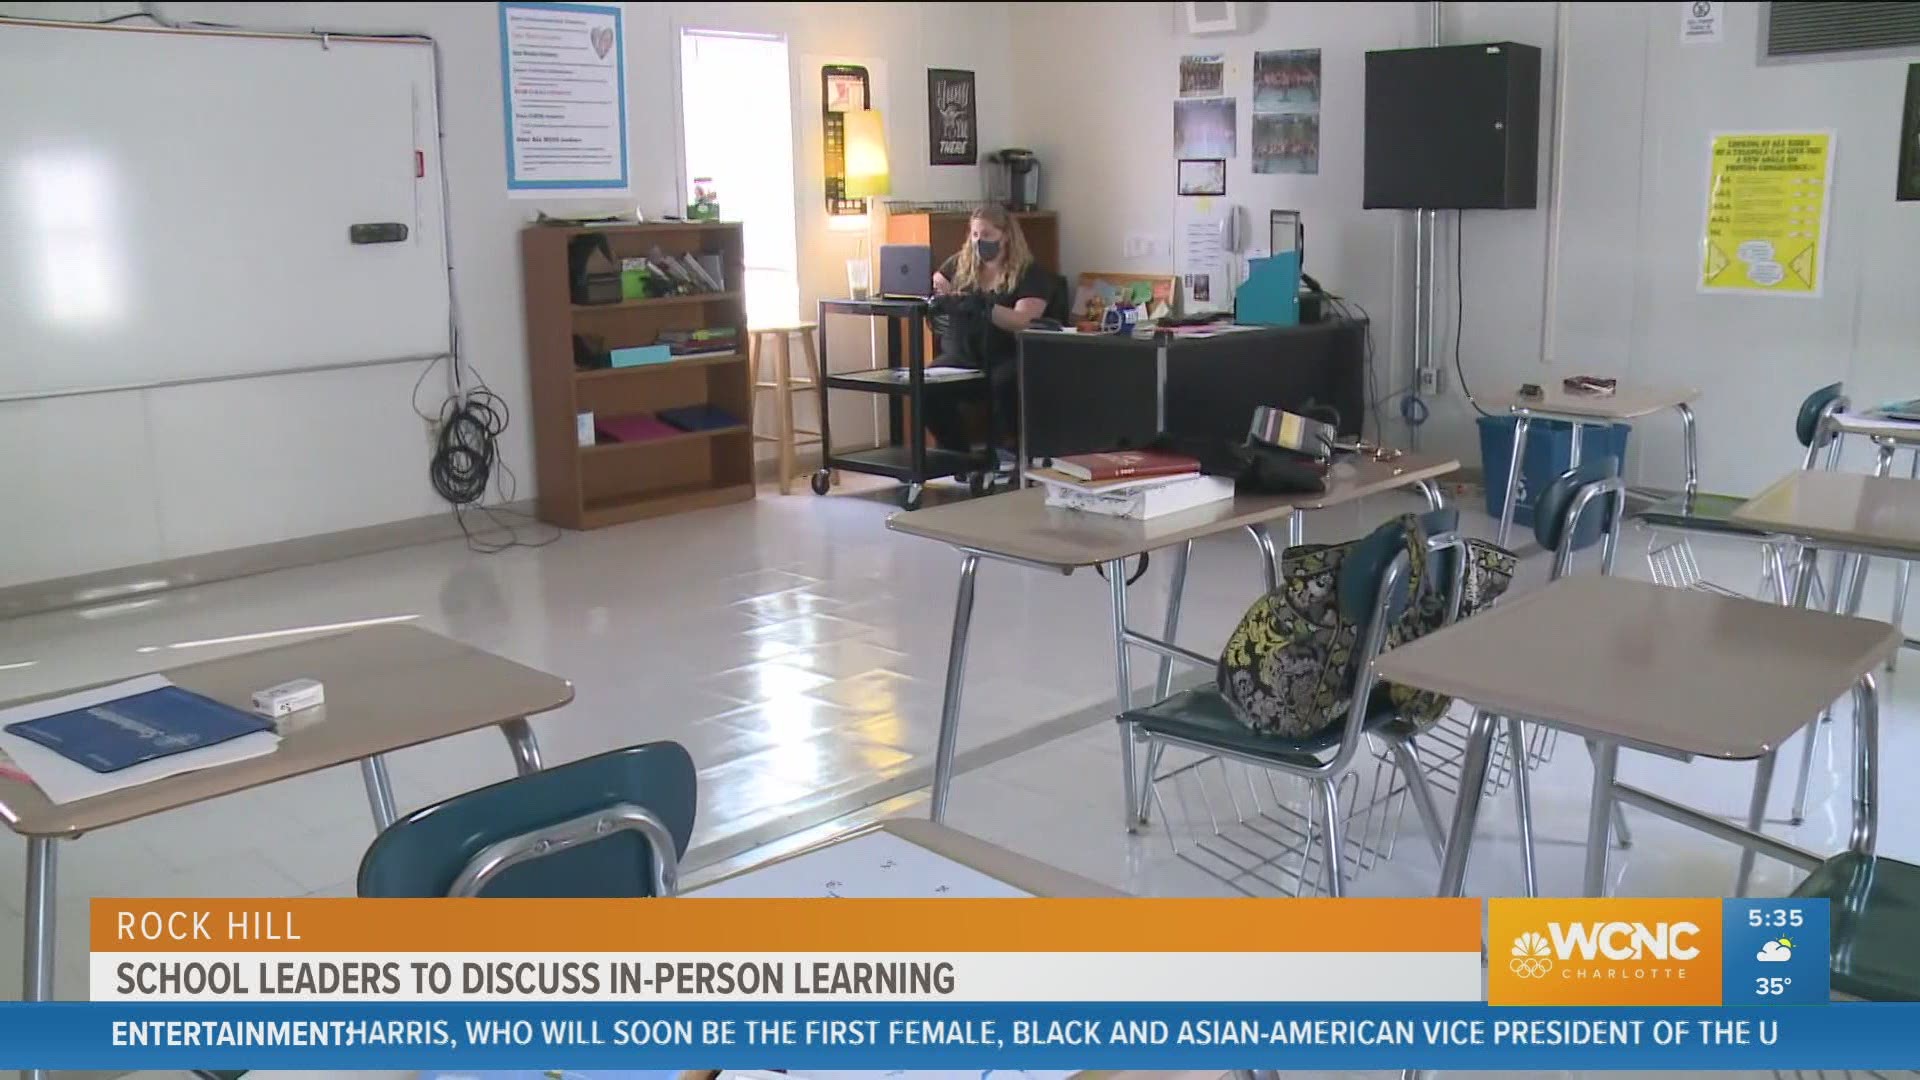 An advocacy group called for an end to all in-person learning hours before Rock Hill school leaders meet to discuss bringing more students back to school.